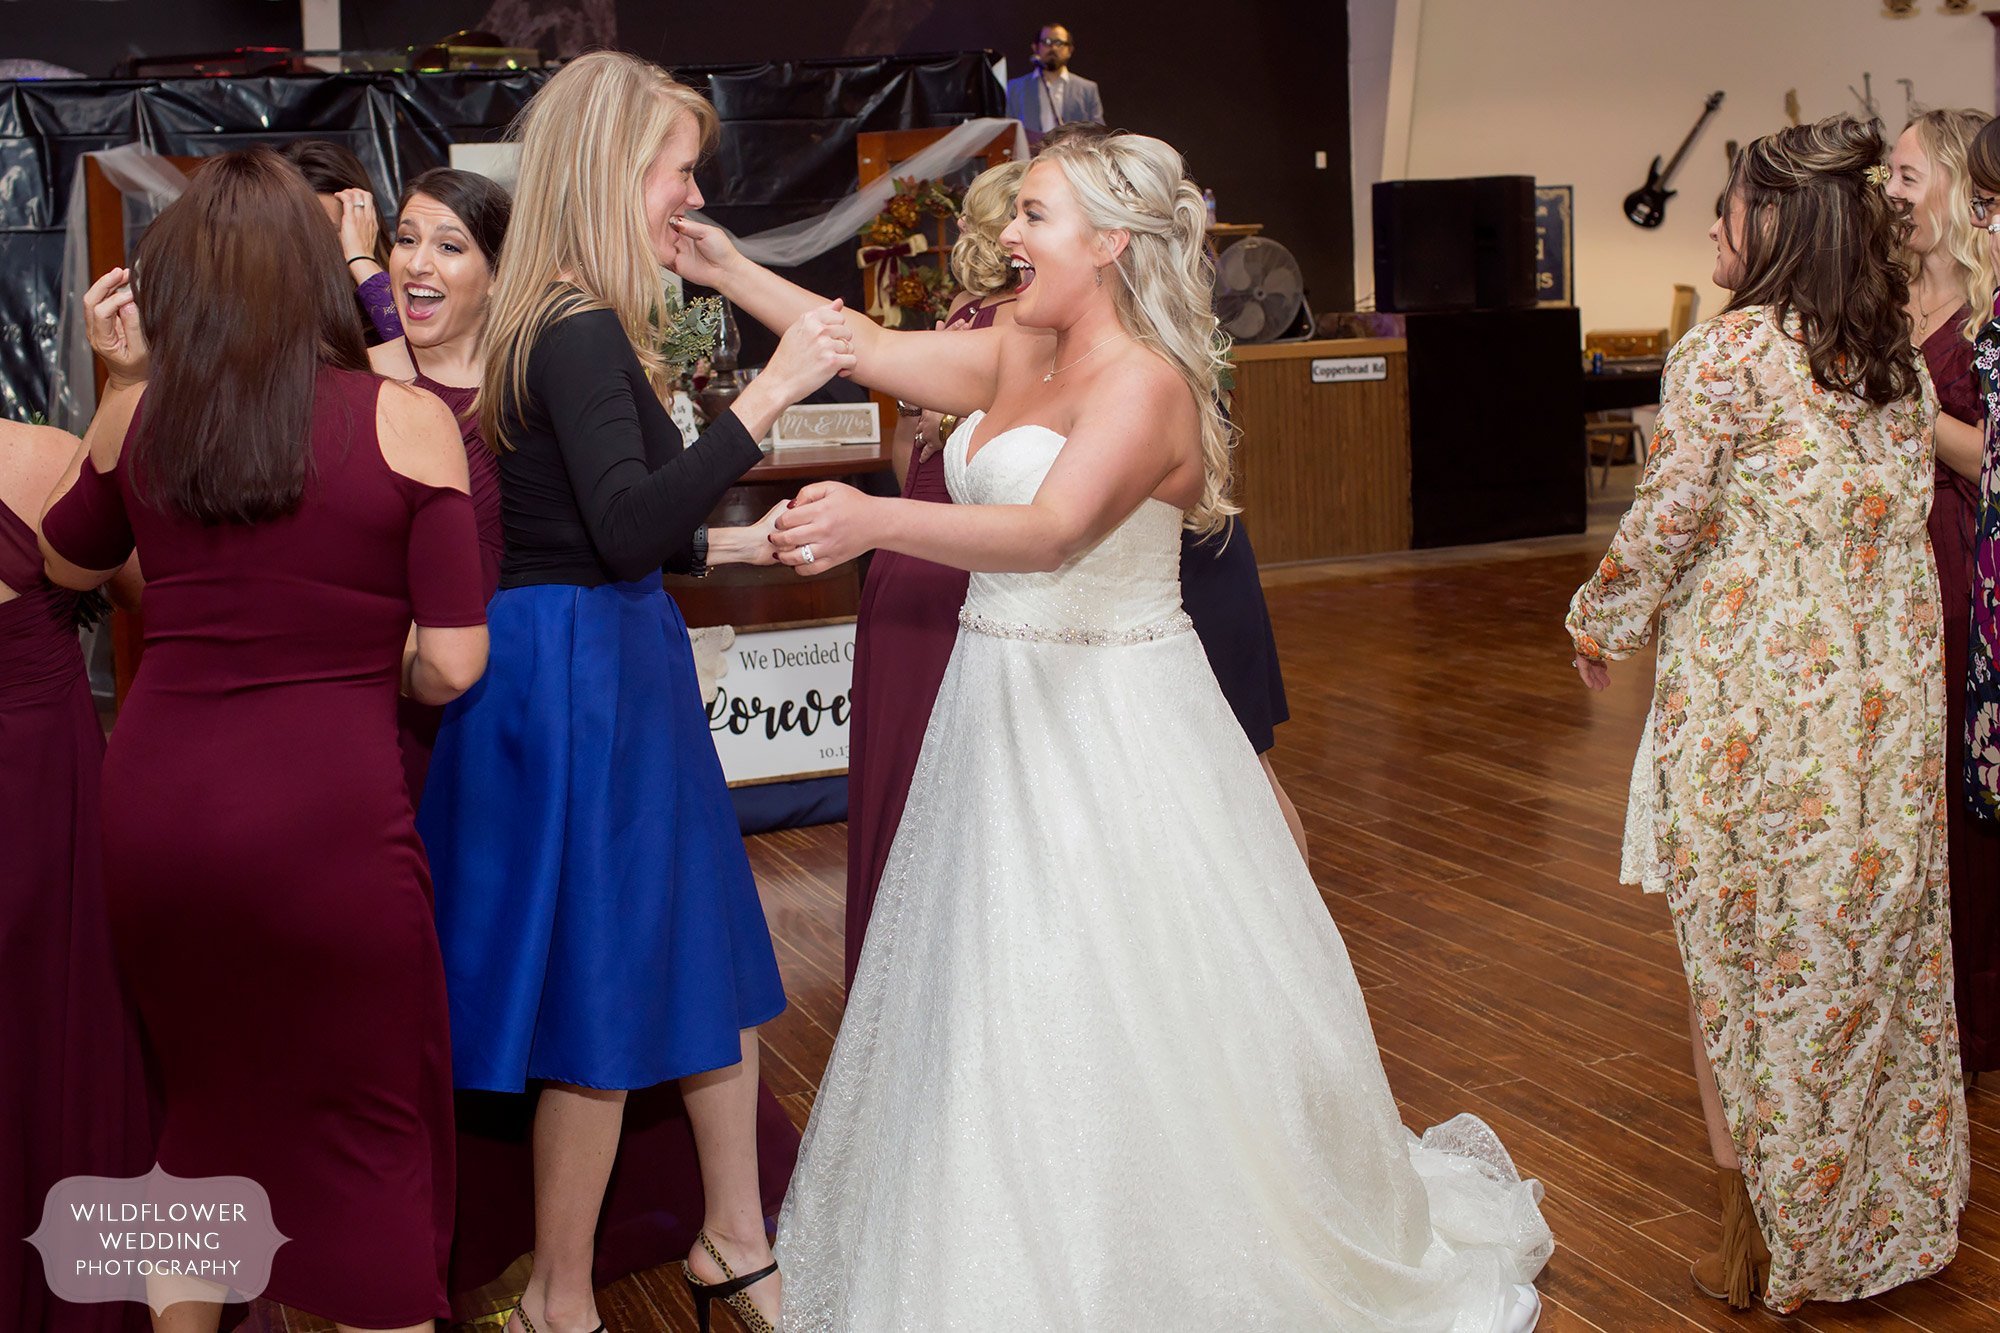 The bride greets her sorority sisters at this Fulton wedding reception.